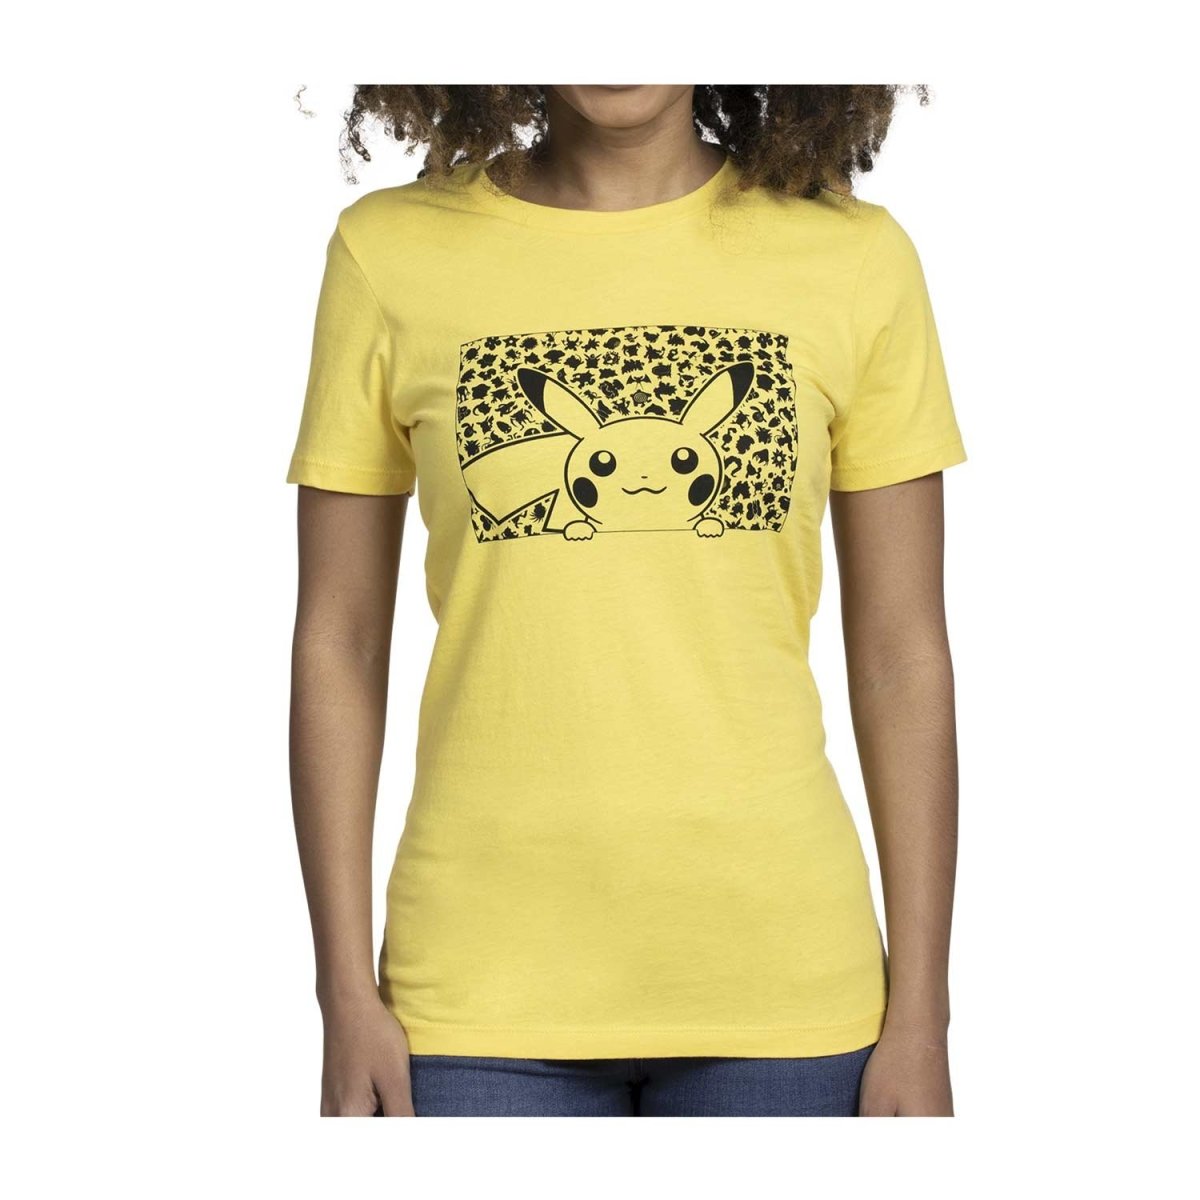 Pikachu & Silhouettes Yellow Fitted Crew Neck T-Shirt - Women